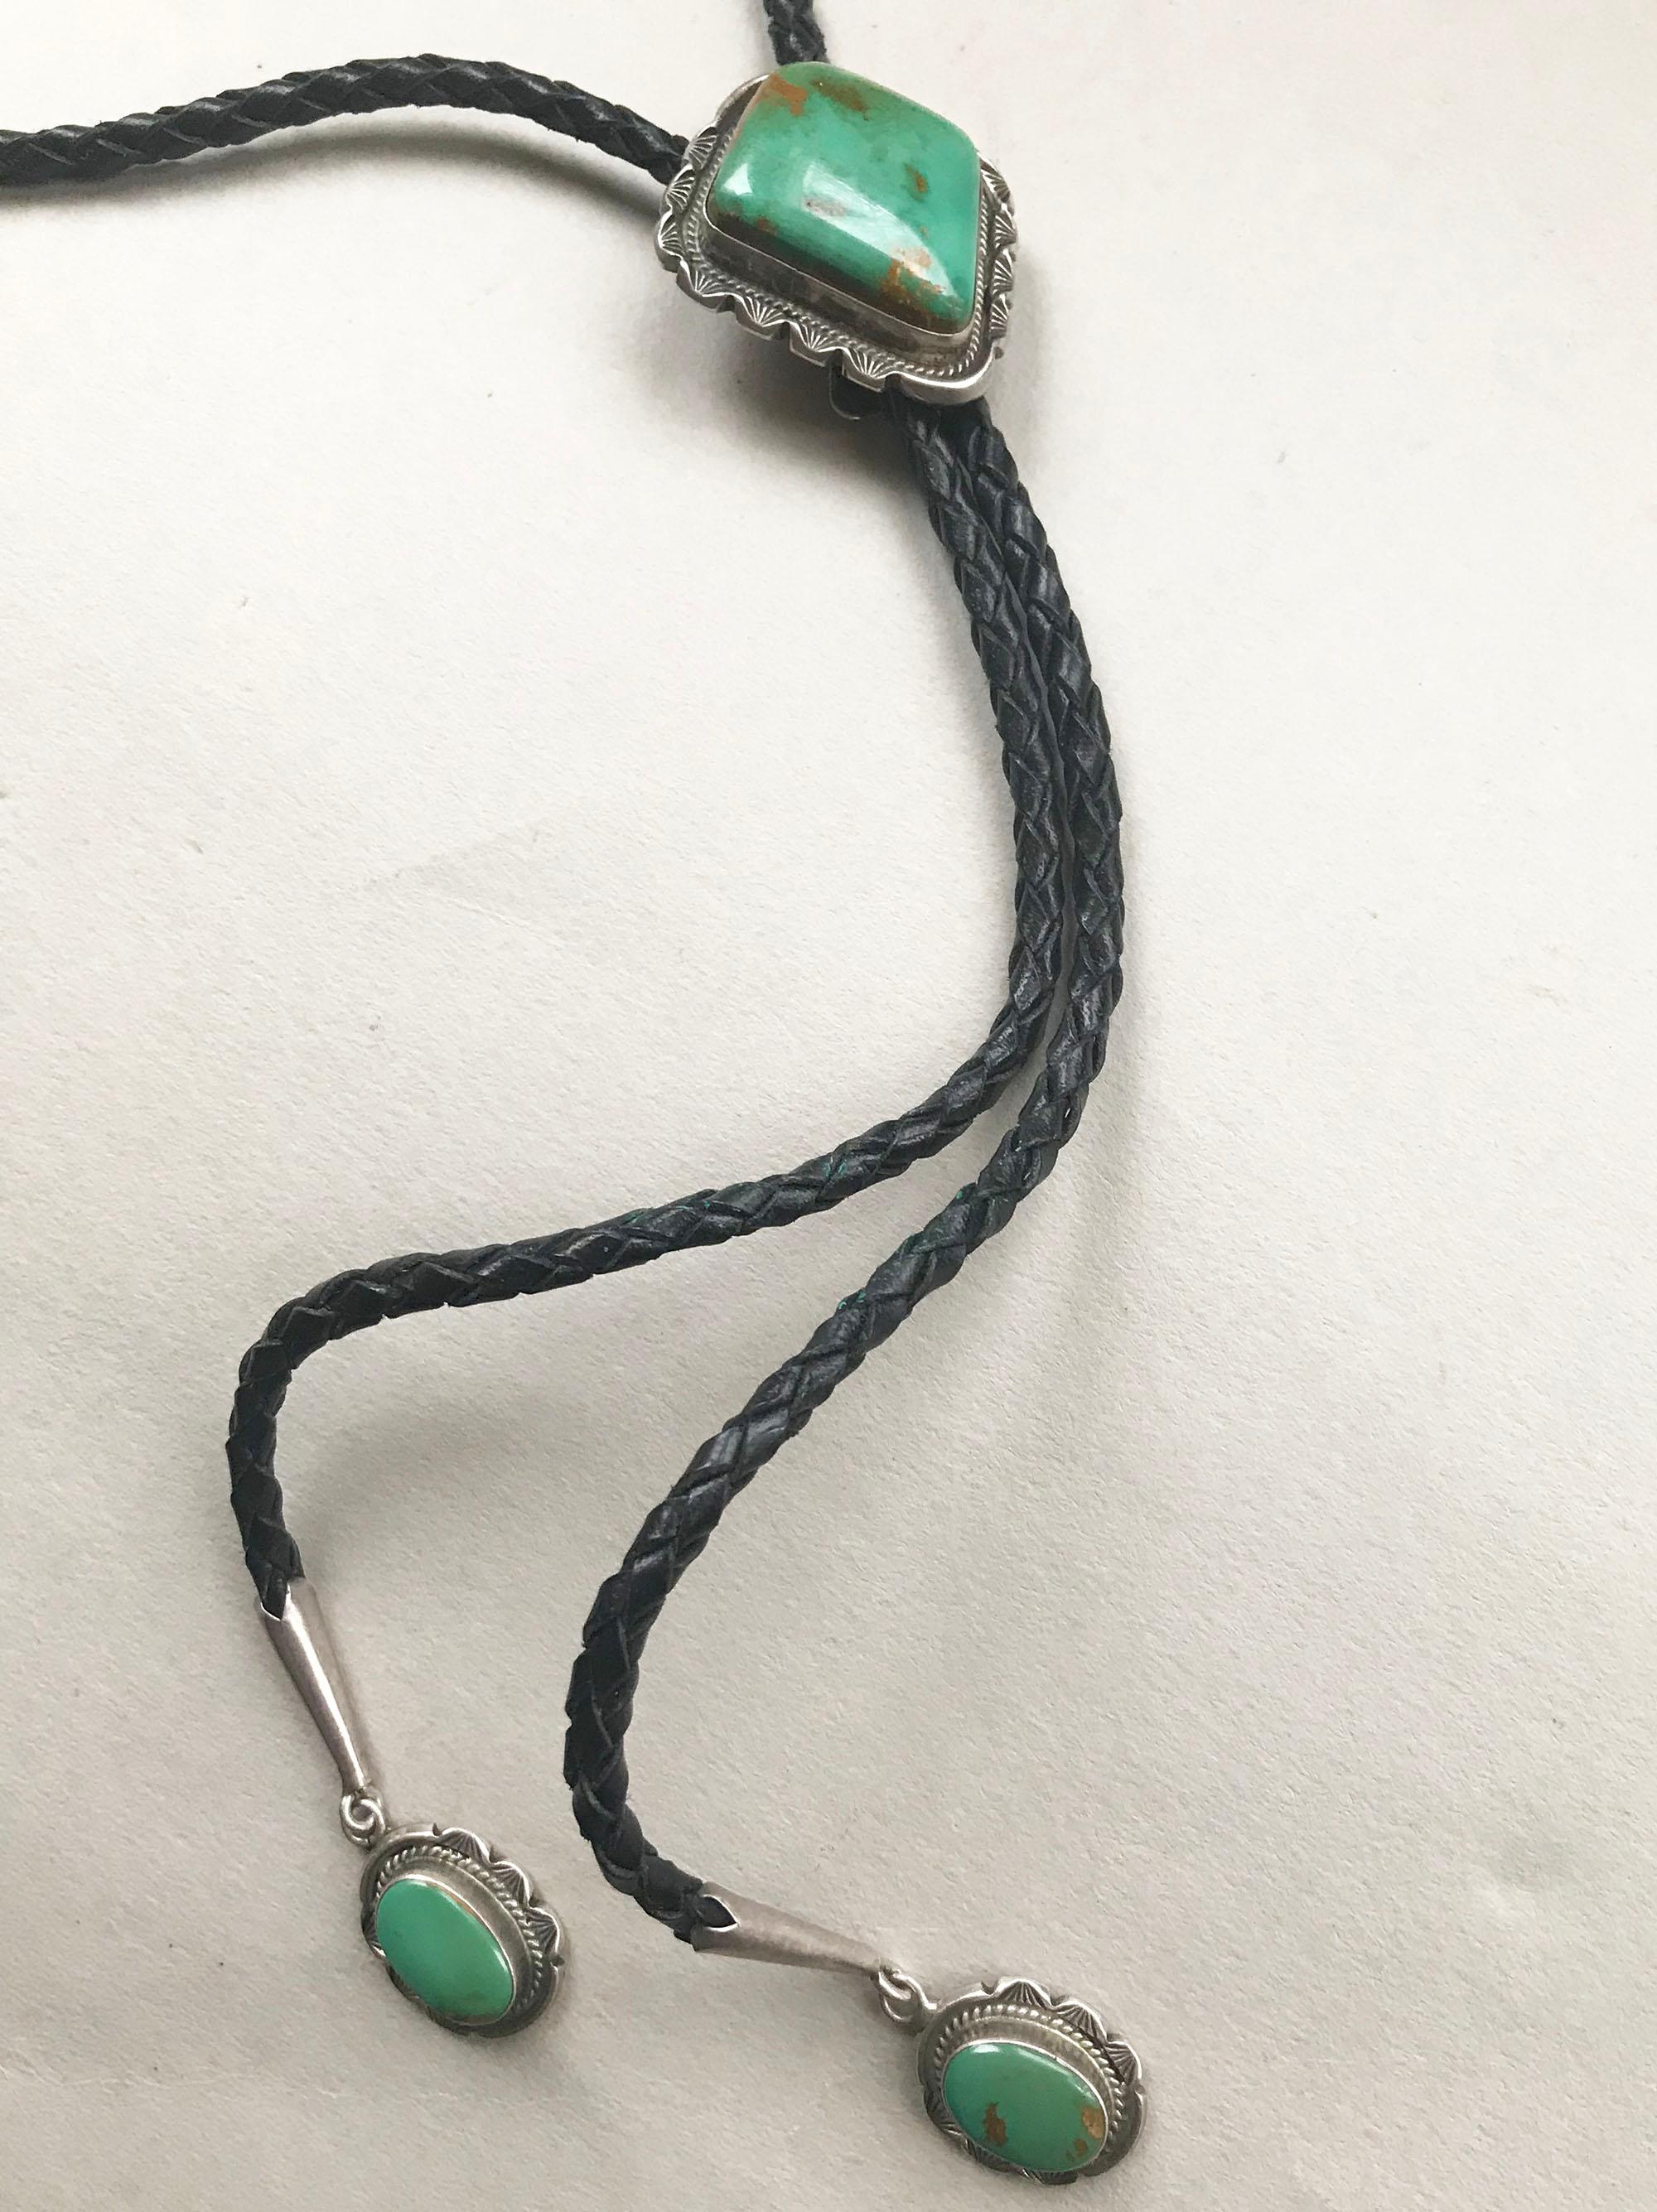 A handsome hand-crafted Navajo design Bolo tie in sterling silver with blue green turquoise 
circa 1960s.
With plaited black leather tie and sterling & turquoise tips.
Measures: 2 x 1 3/4